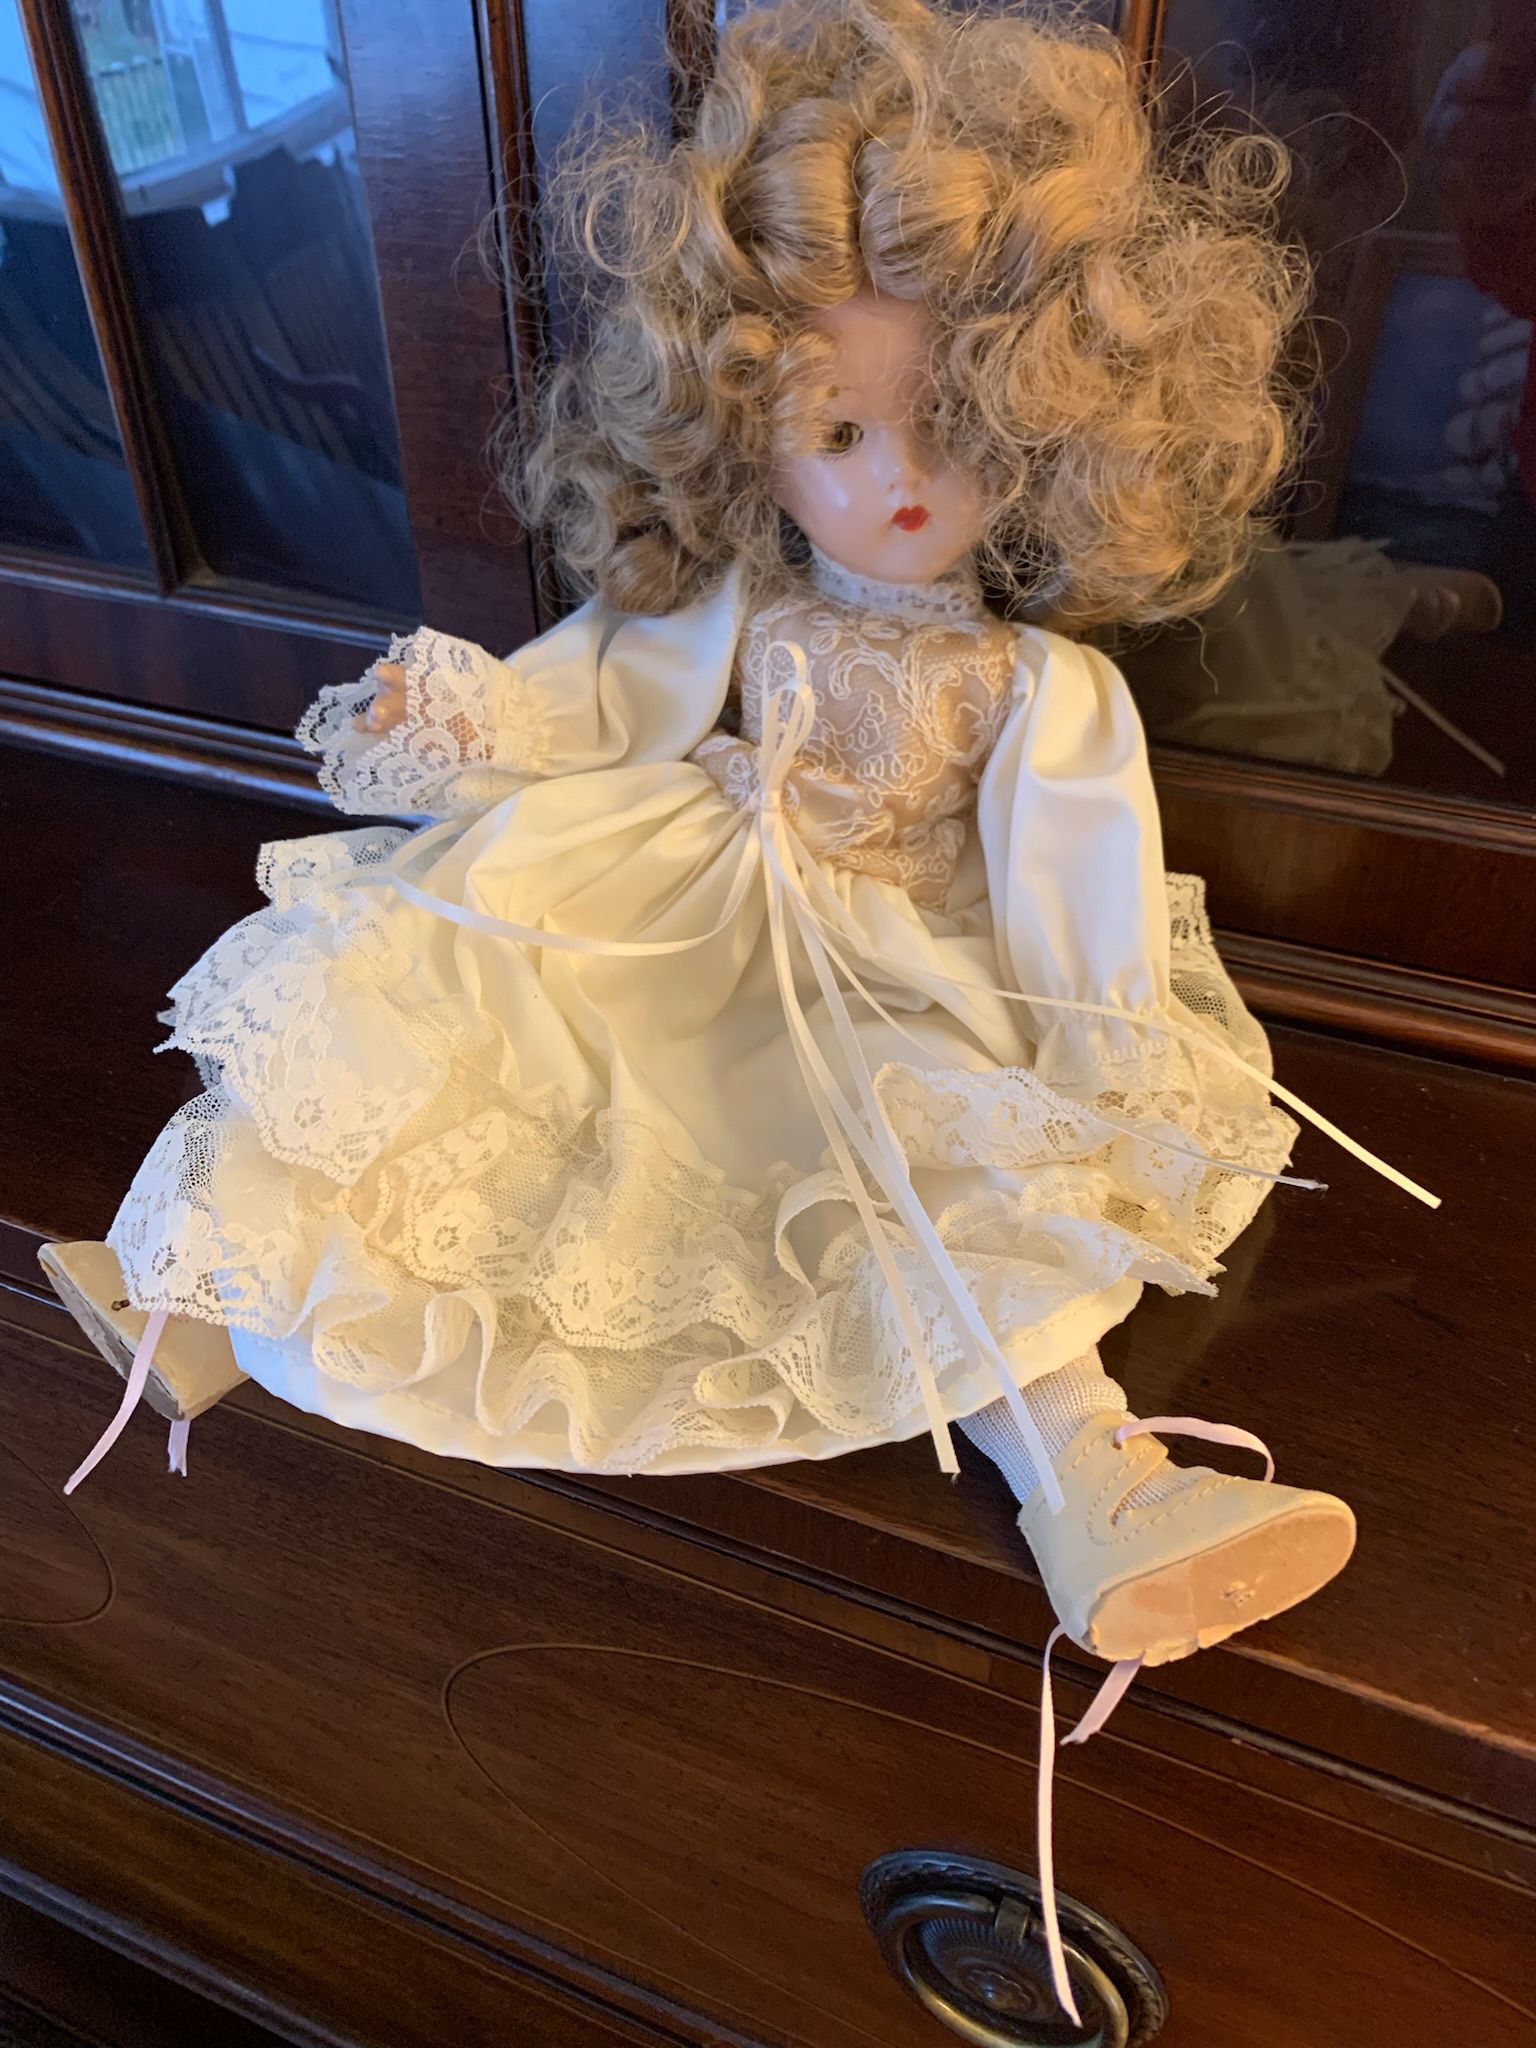 Antique Doll by Suzanne Effanbee in Very Good Condition. Made in the USA. 